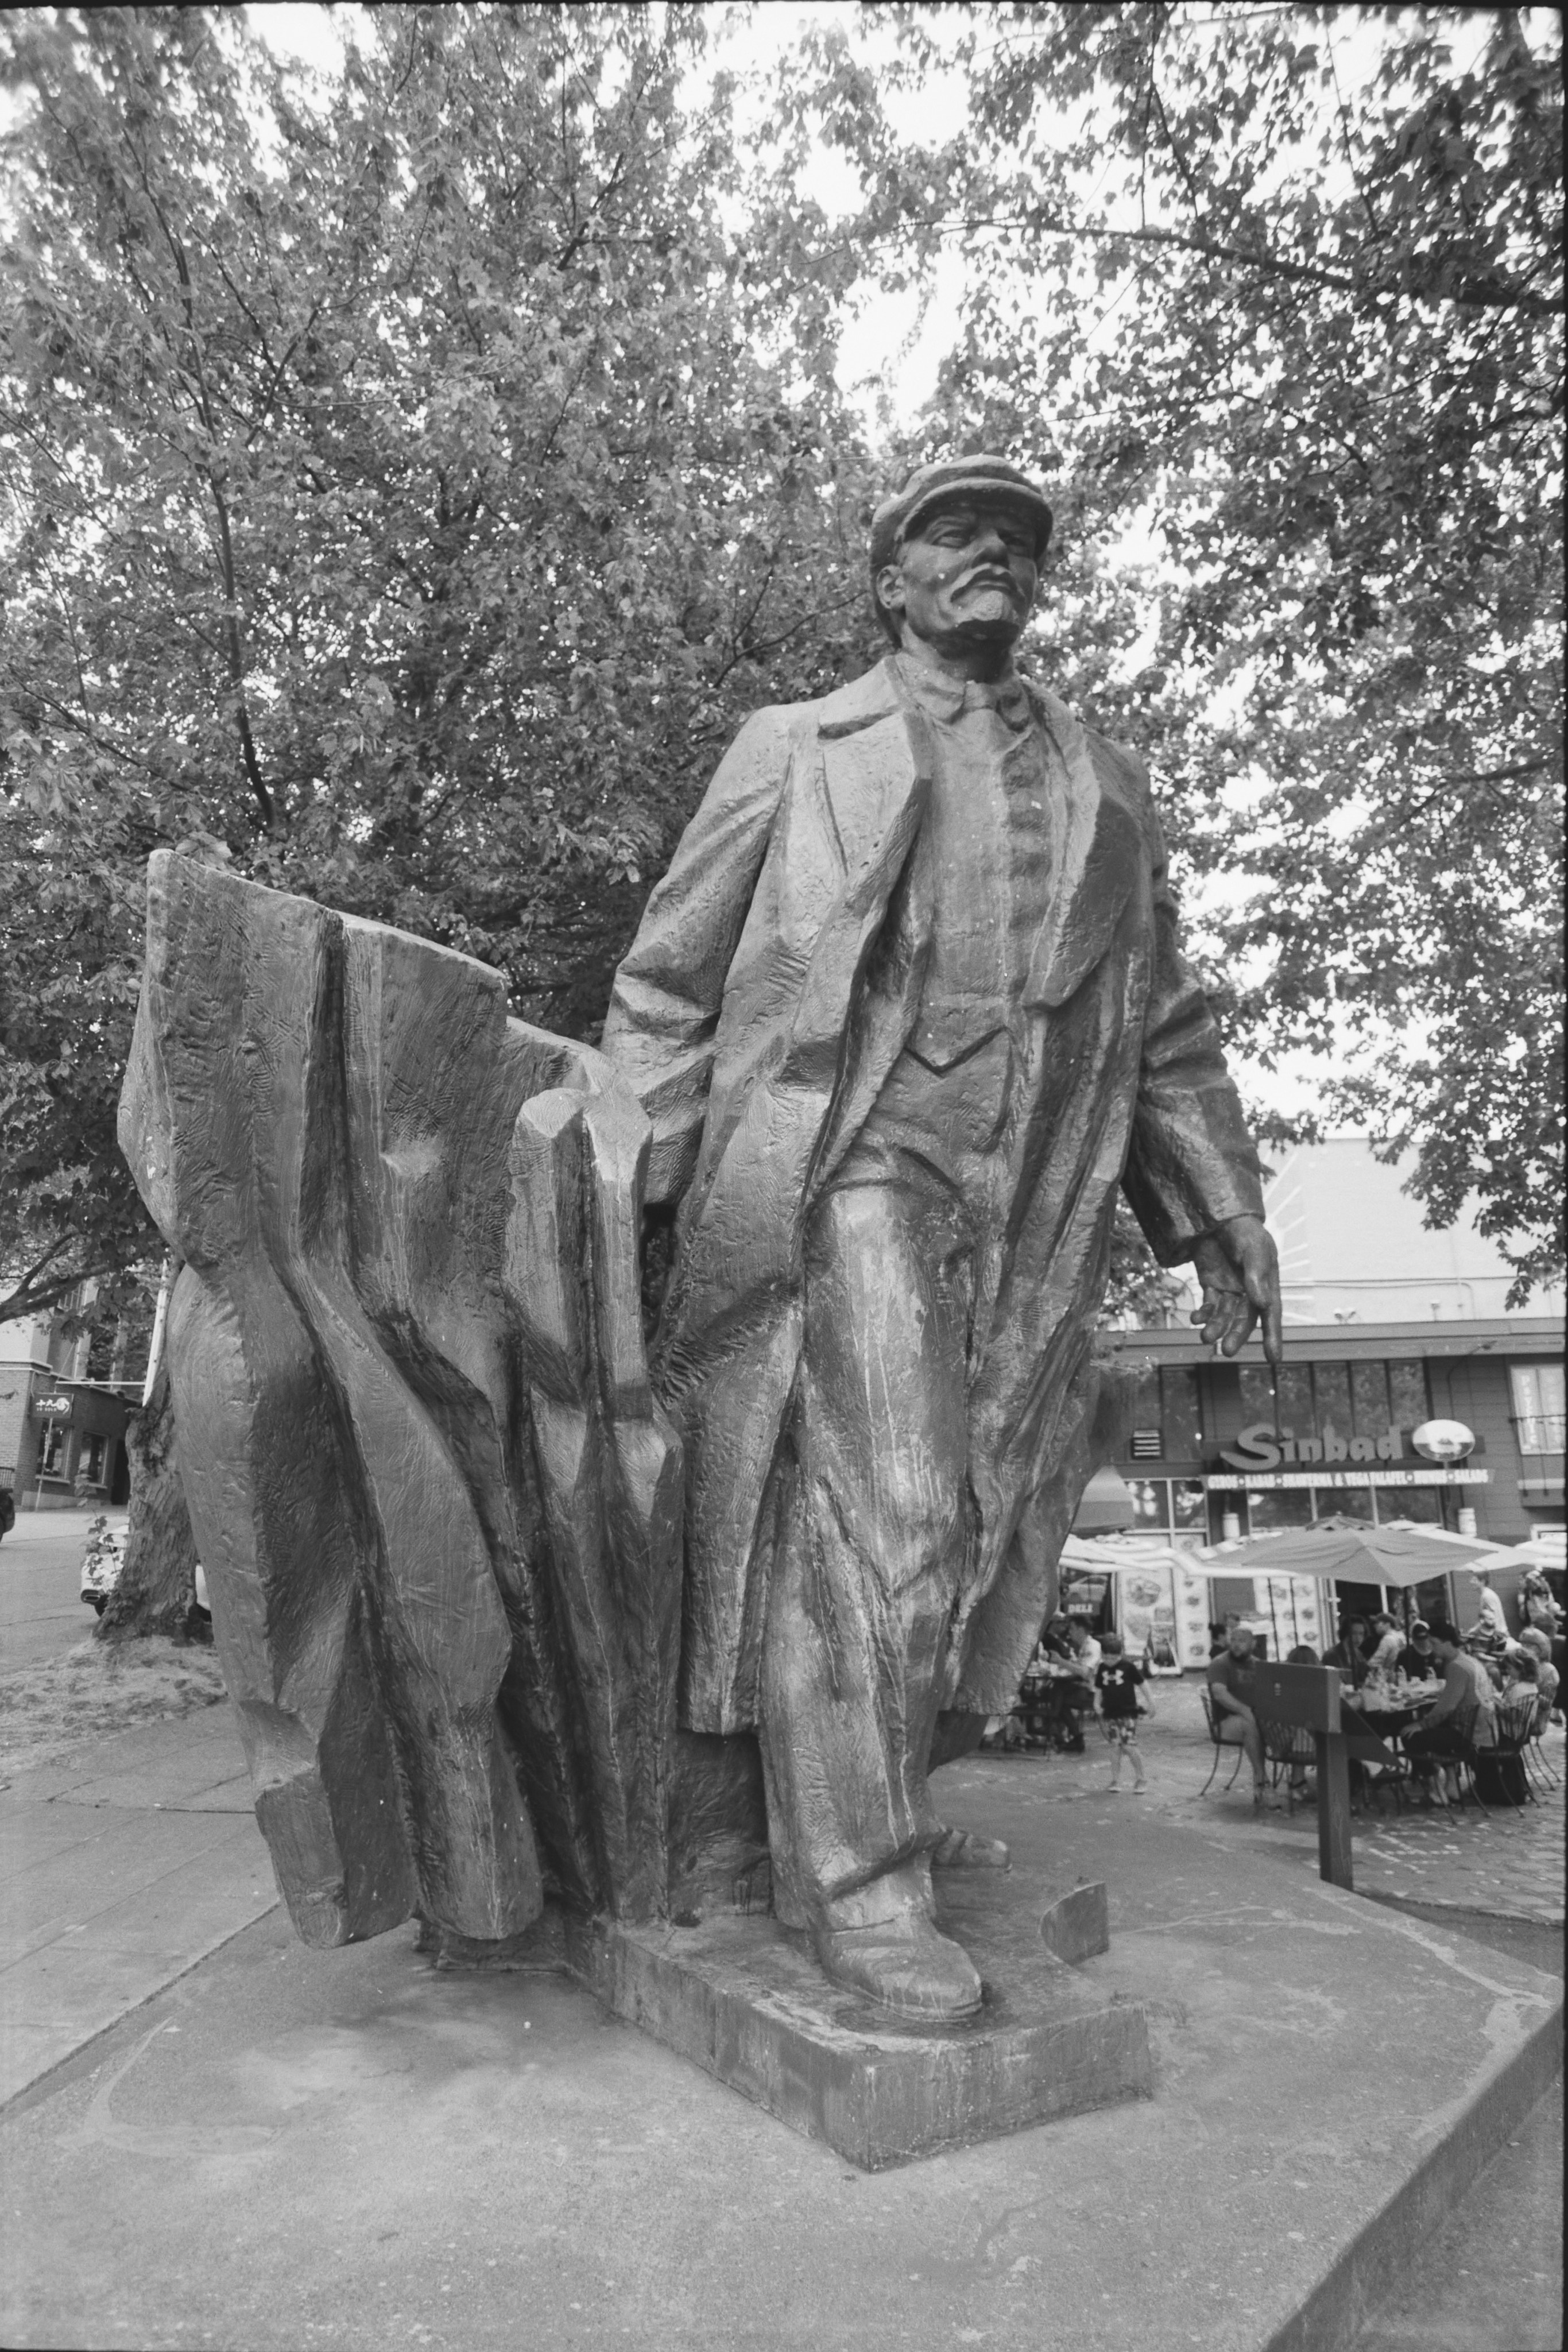 Fremont is home to many 'quirky' things, including this famous Lenin statue